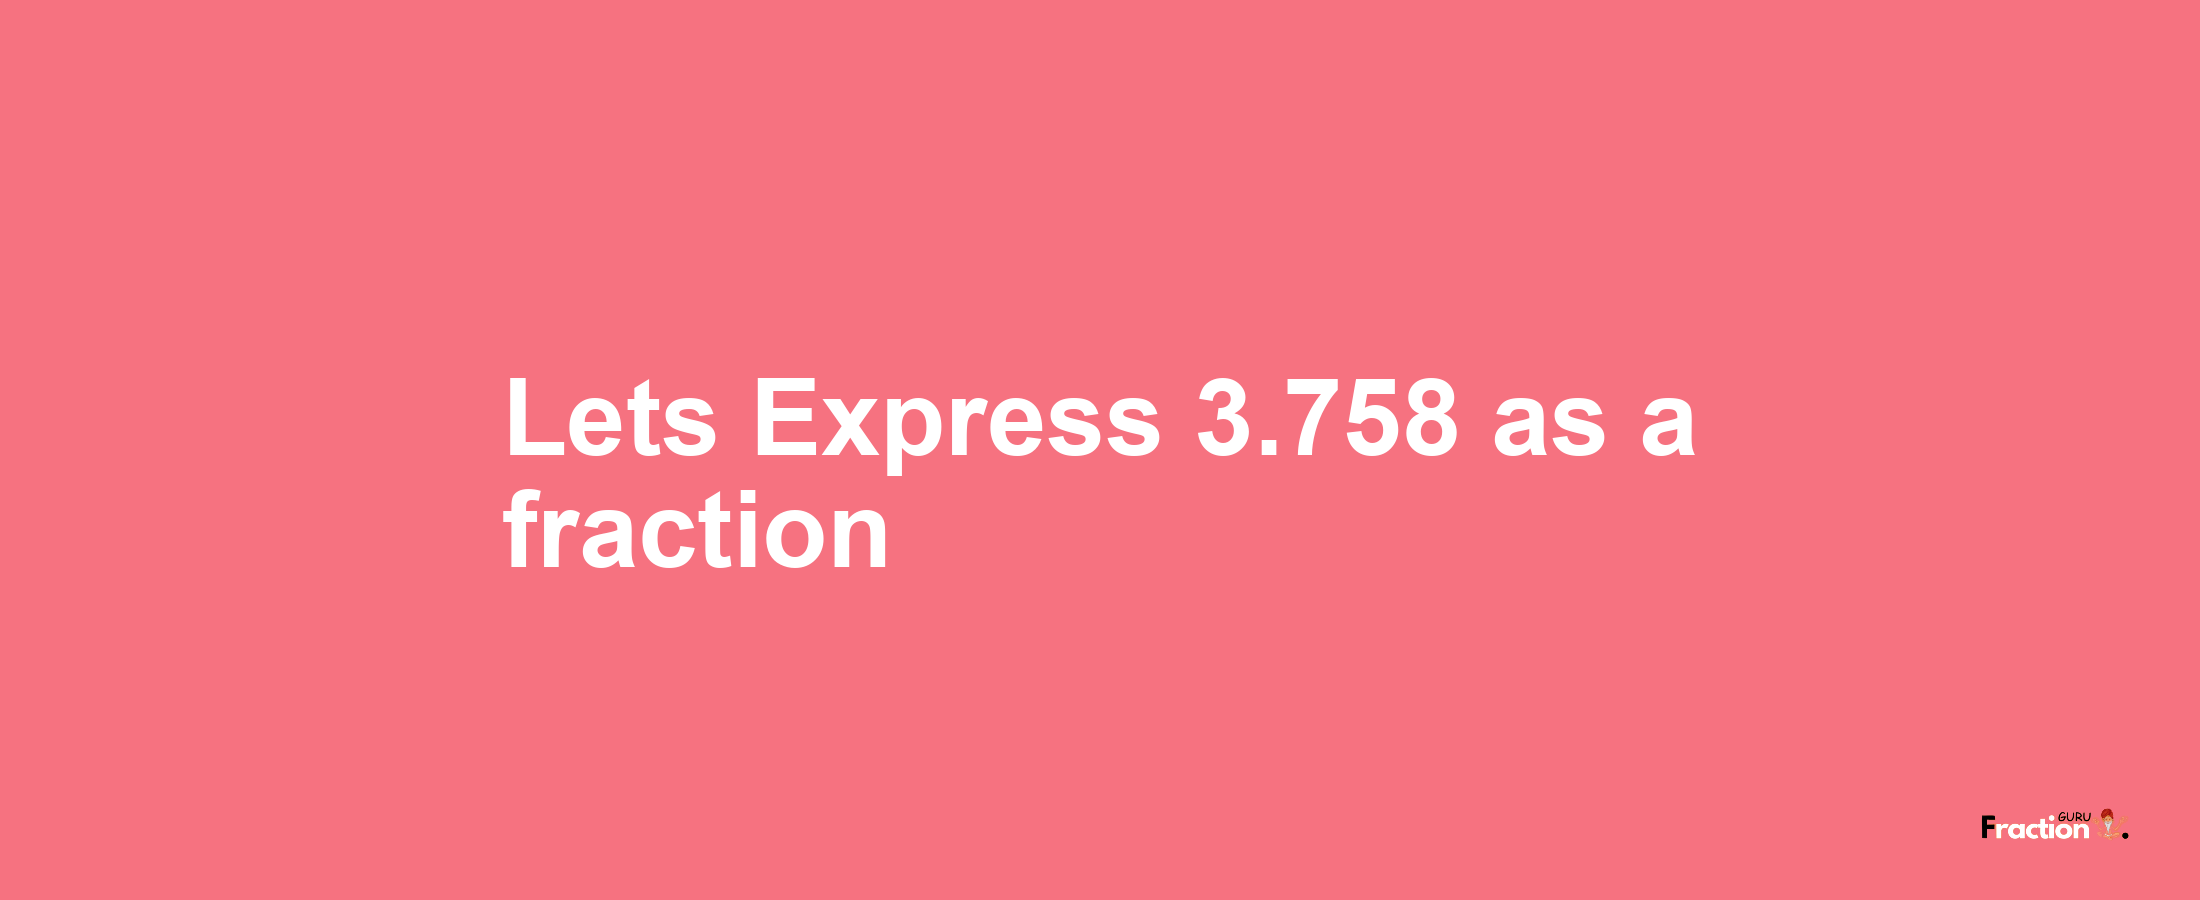 Lets Express 3.758 as afraction